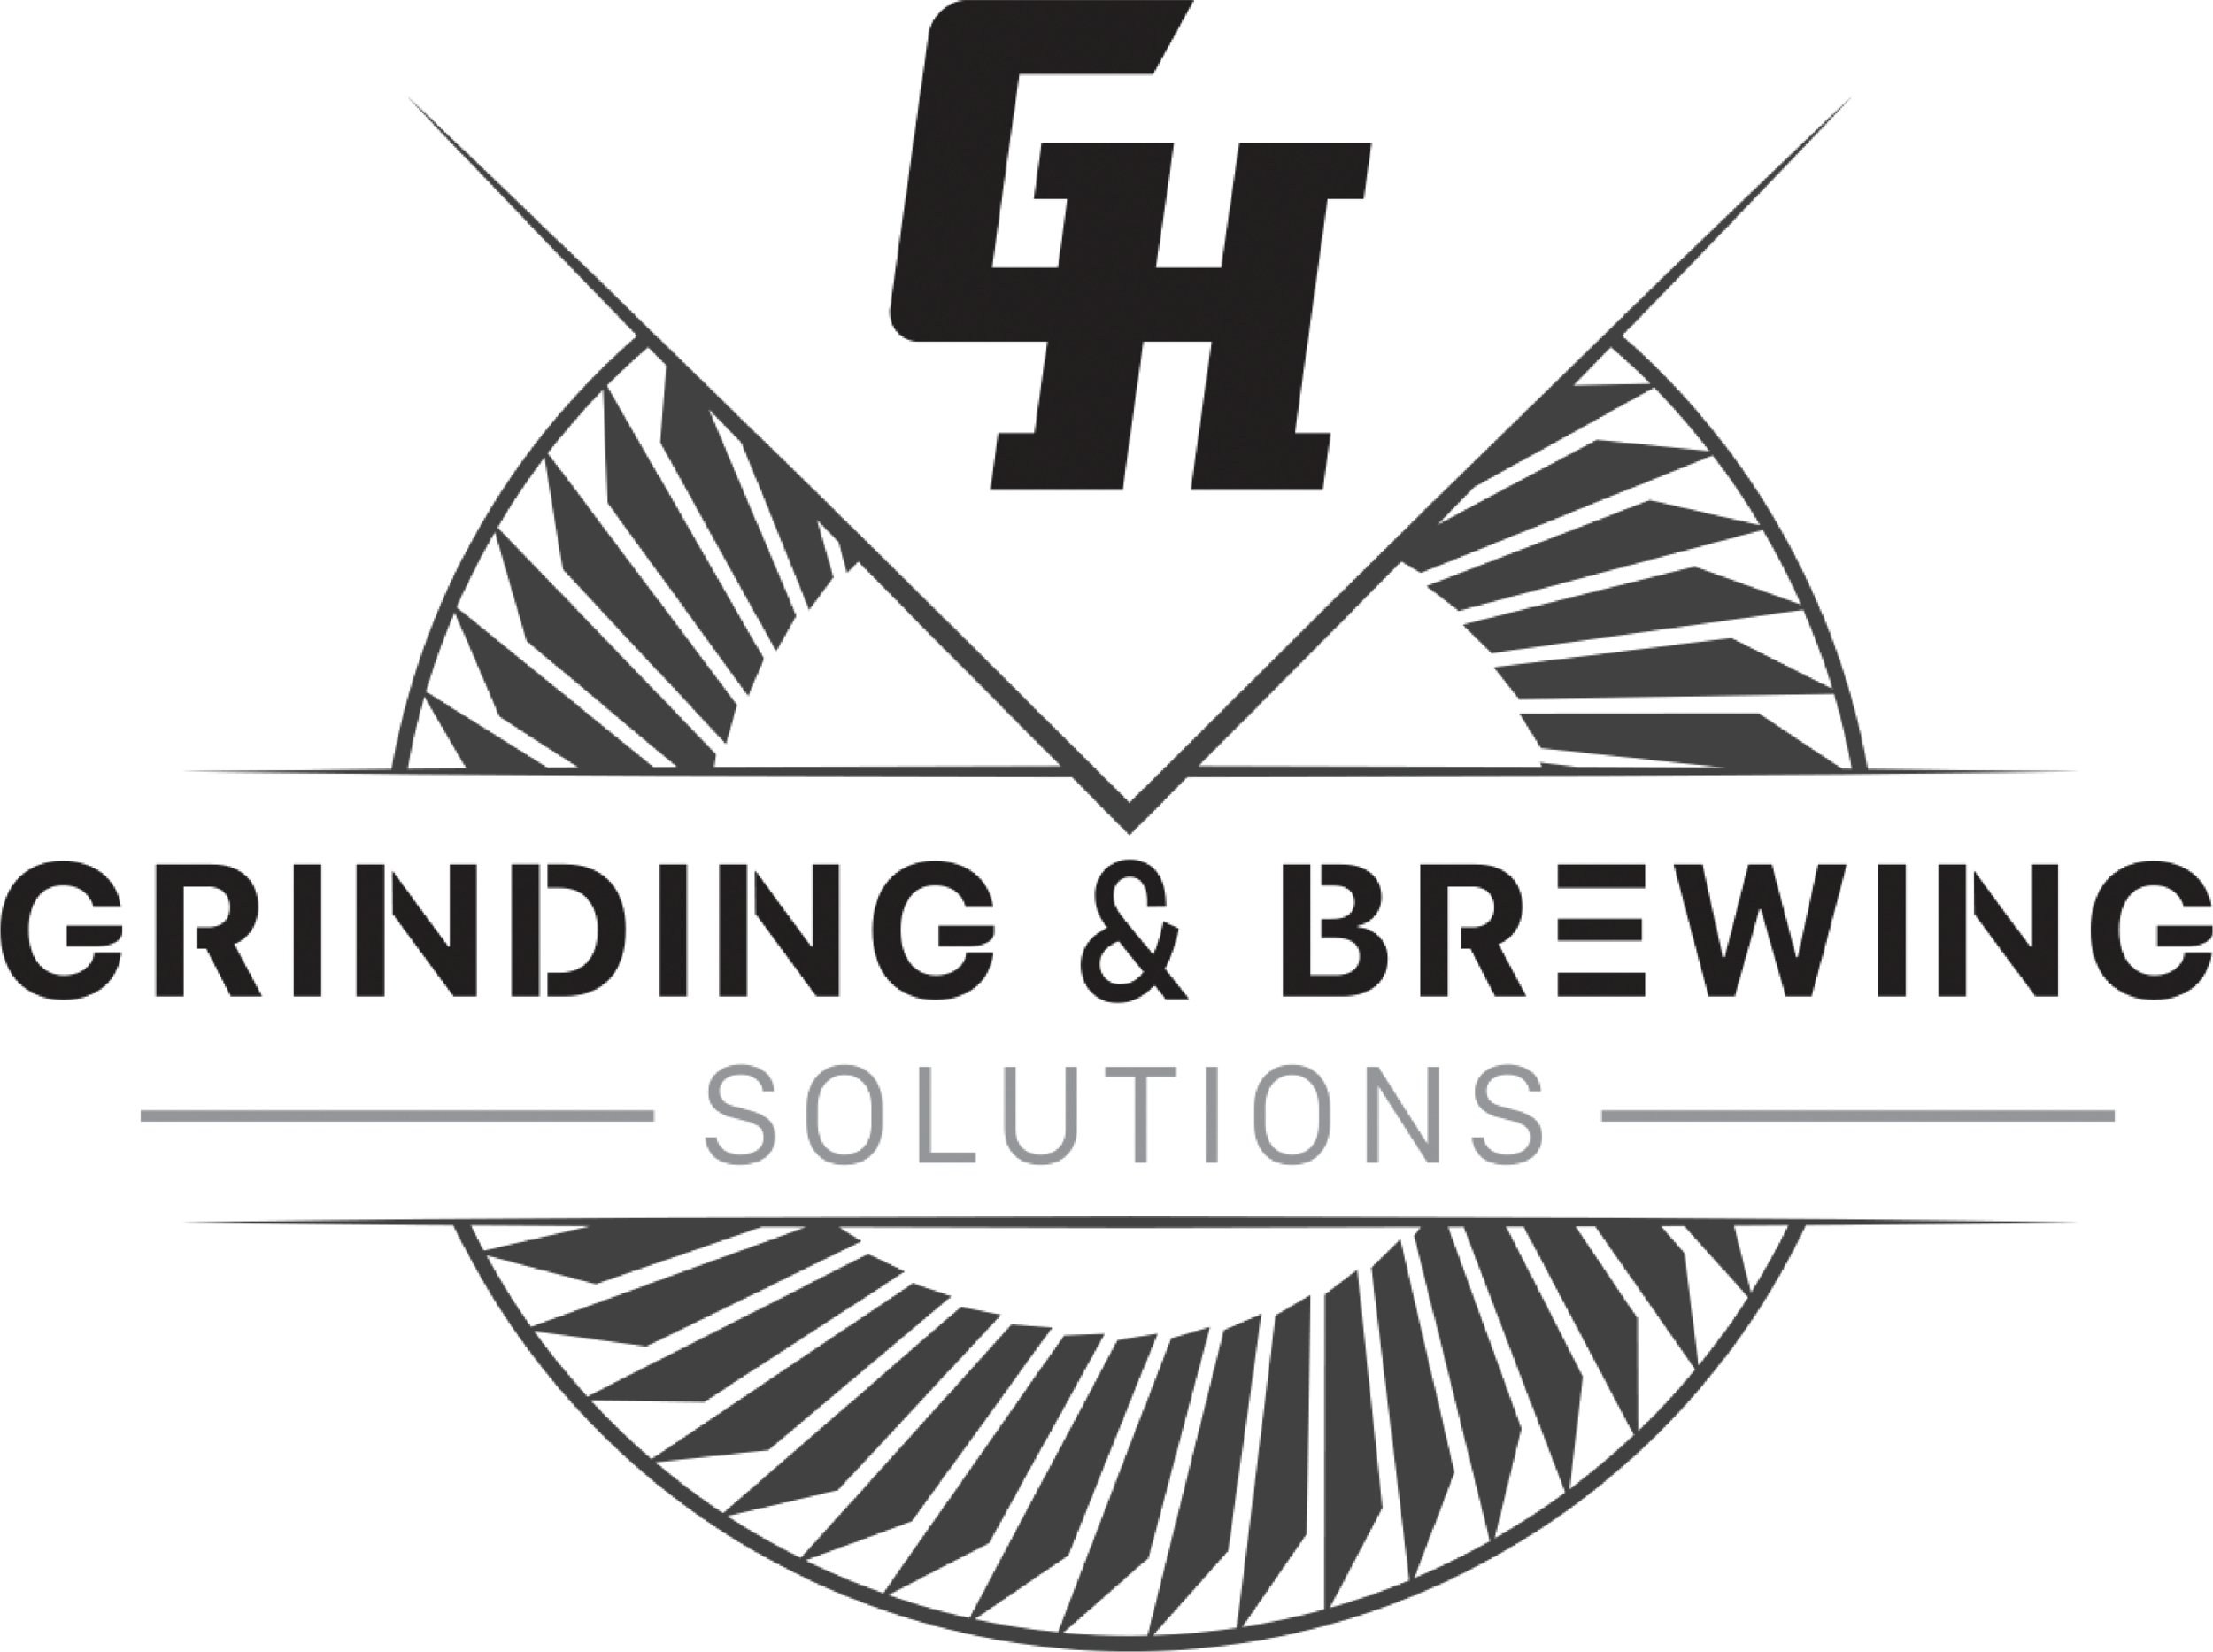 GH Grinding & Brewing Solutions-Monochrome.png